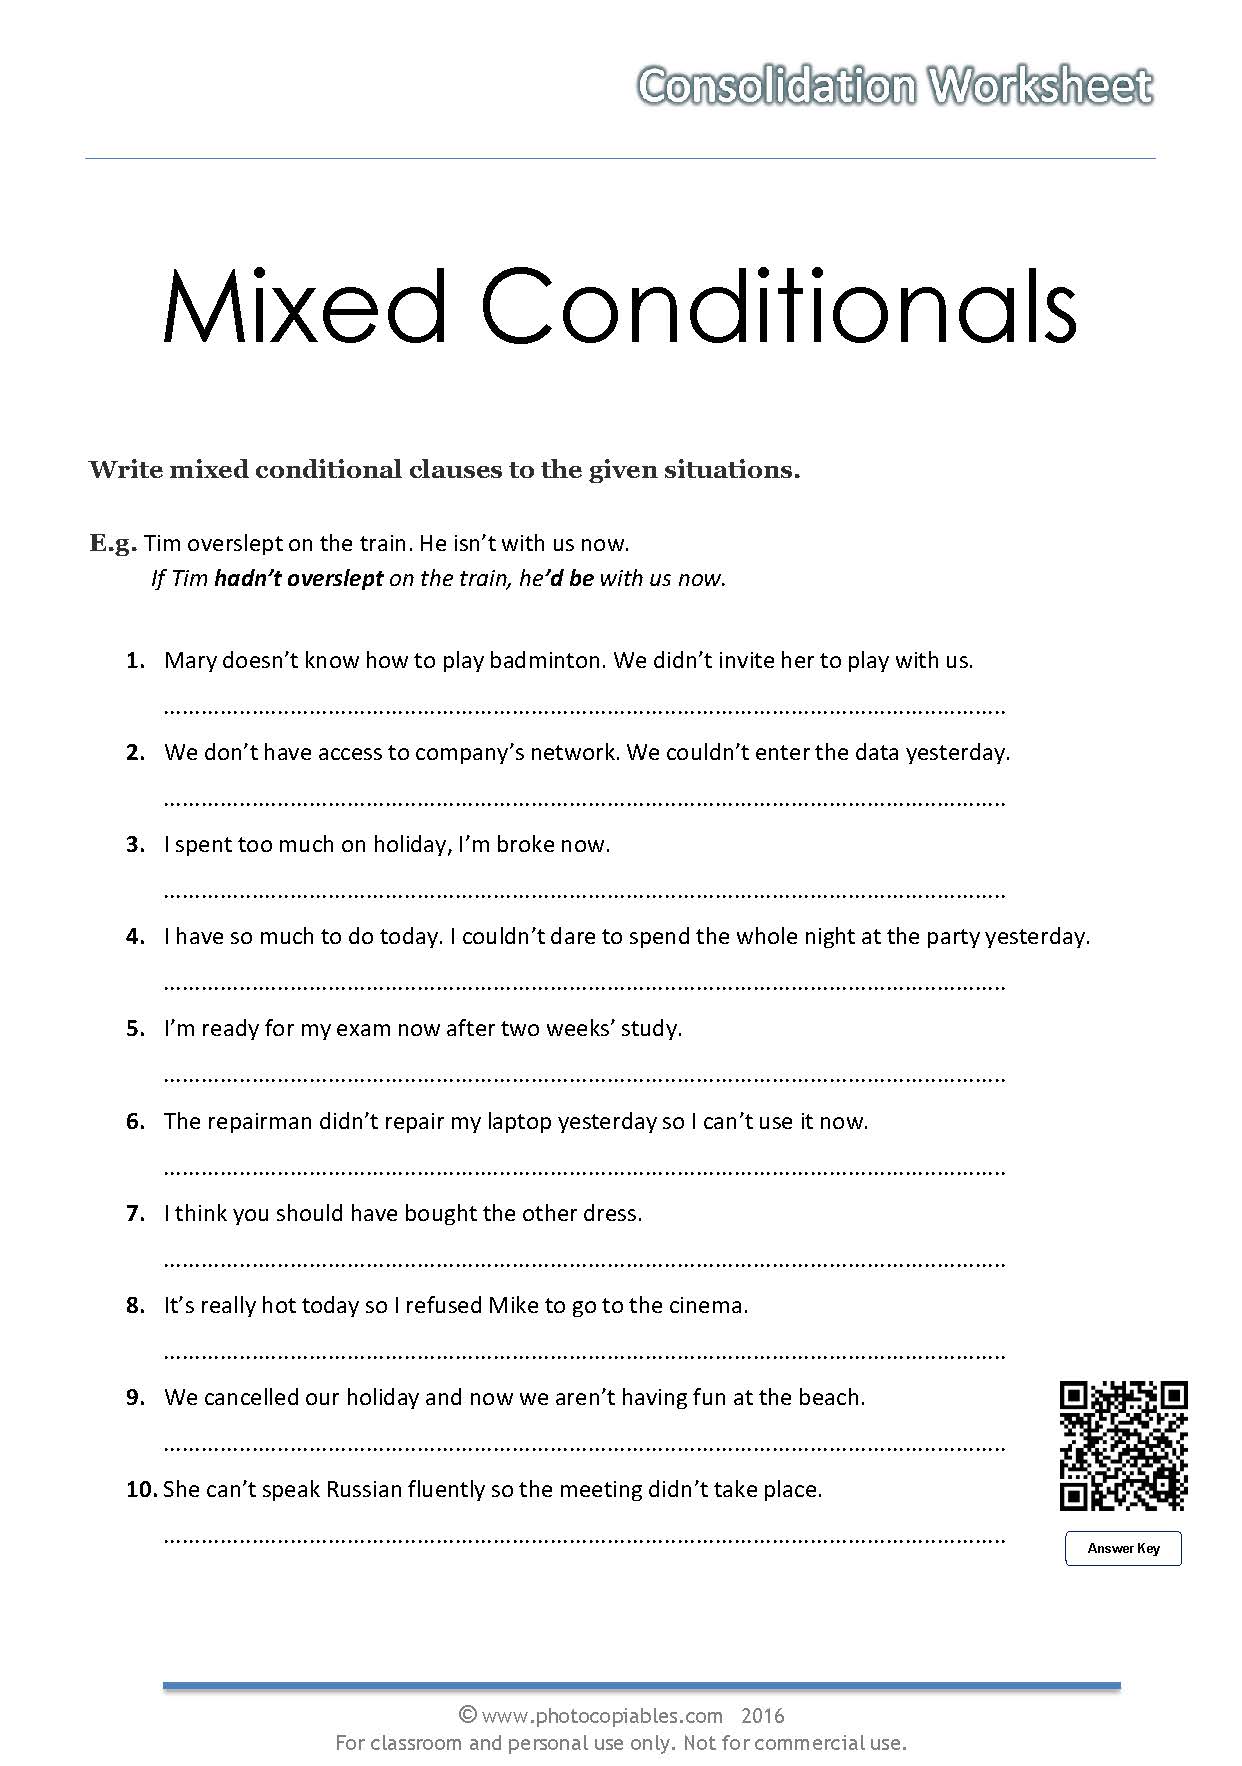 identifying the hypothesis and conclusion of a conditional statement worksheet